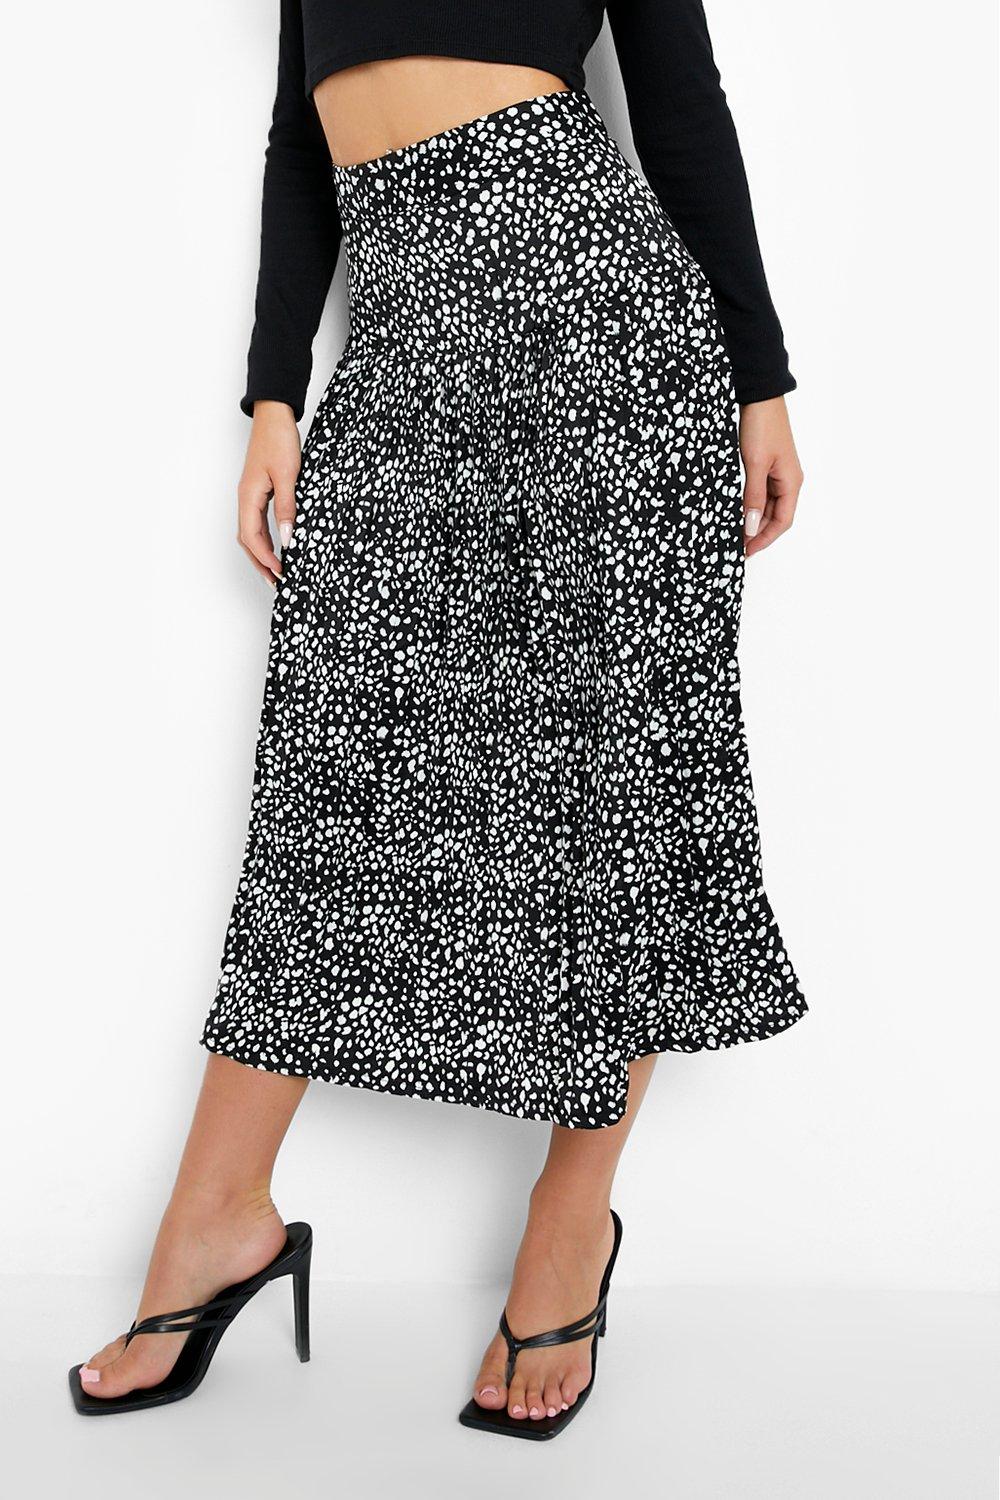 Chic Women's Midi Skirts at Great Prices  Dress to Impress With a Midi  Skirt Outfit for Work or Casual Outings - Lulus